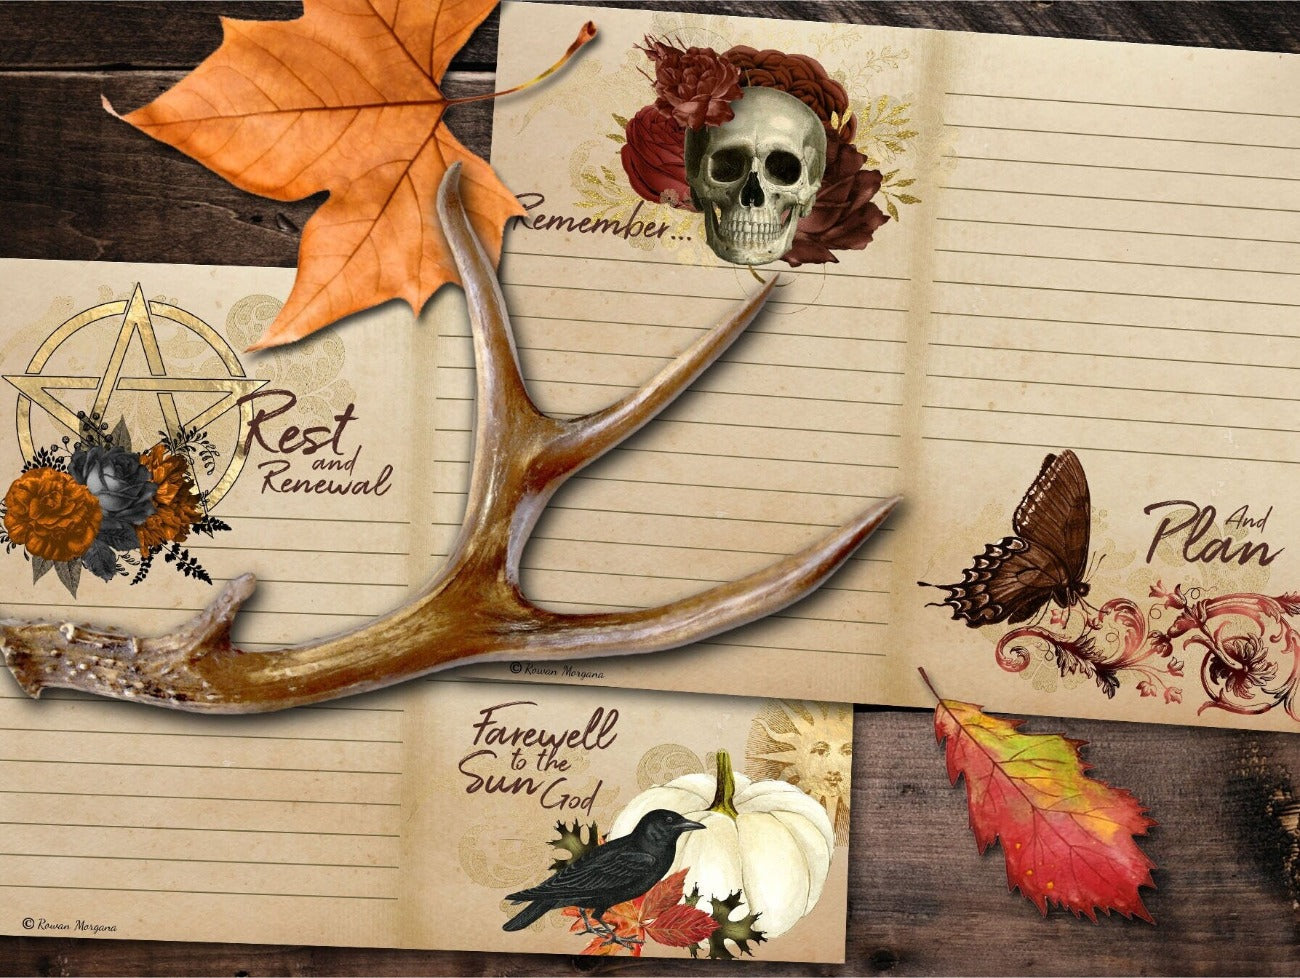 Rest and Renewal, Farewell to the Sun, Remember, And Plan MABON JUNK JOURNAL Kit Printable Pages - Morgana Magick Spell